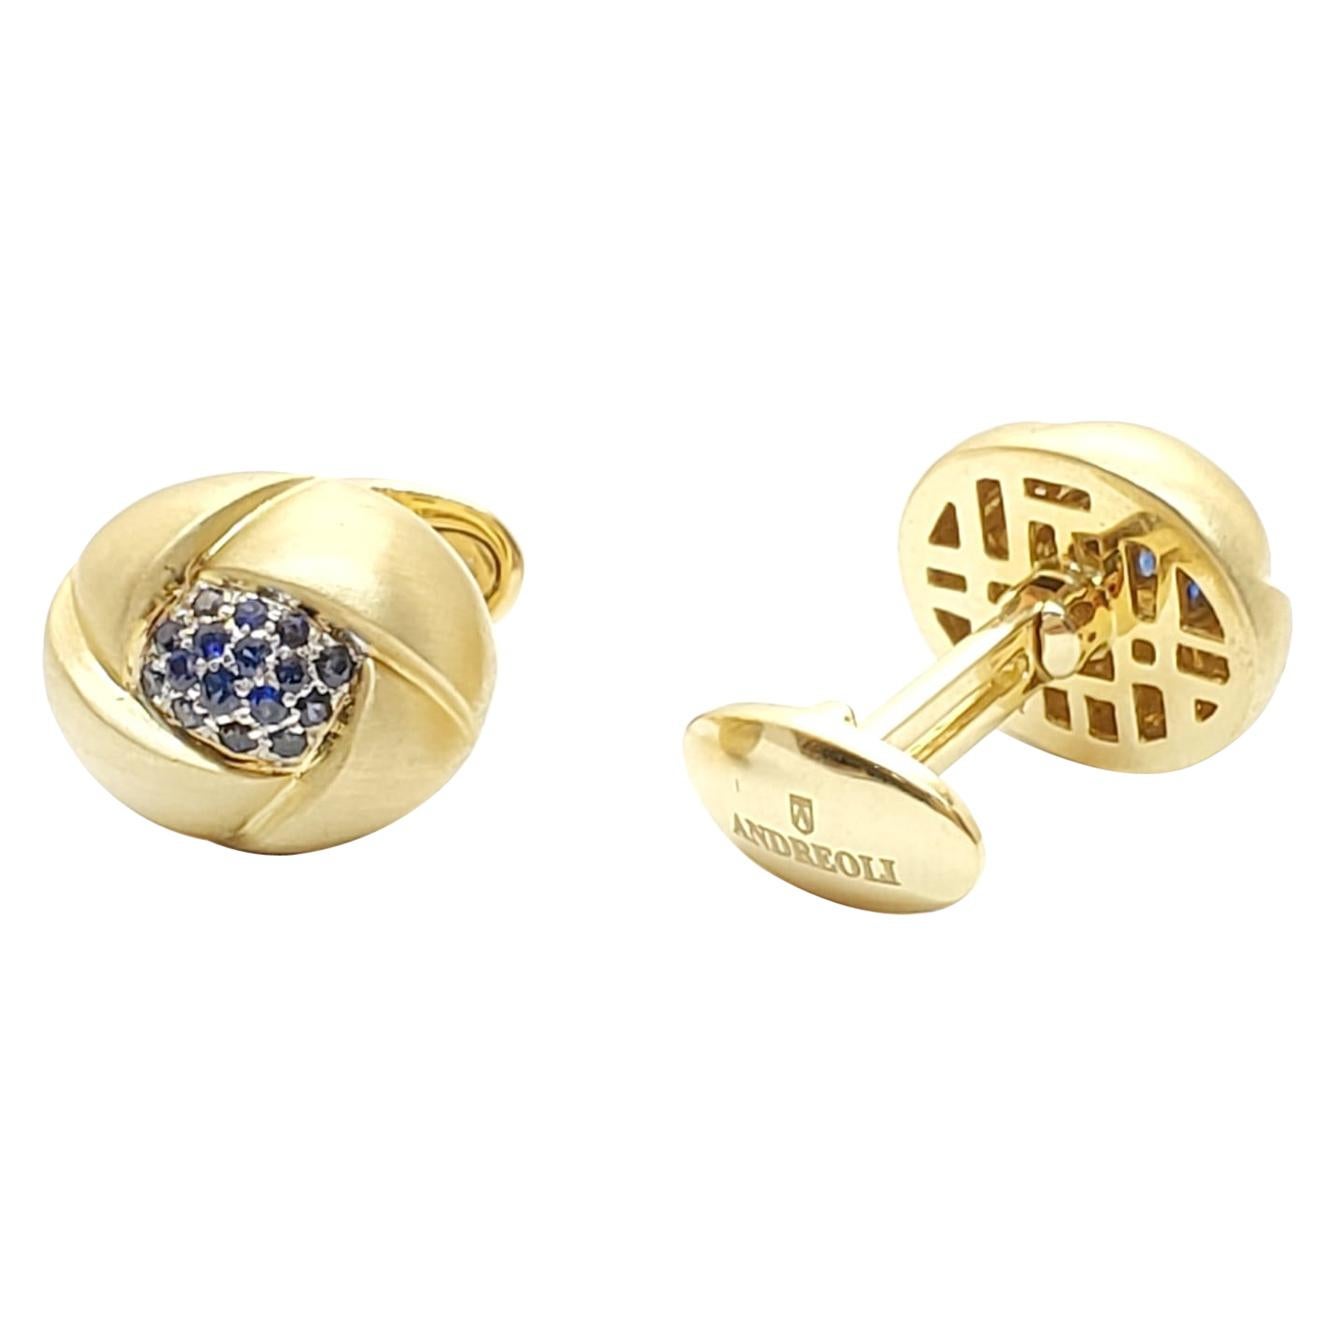 Andreoli 18k Gold Yellow Brushed Gold and Blue Sapphire Cufflinks